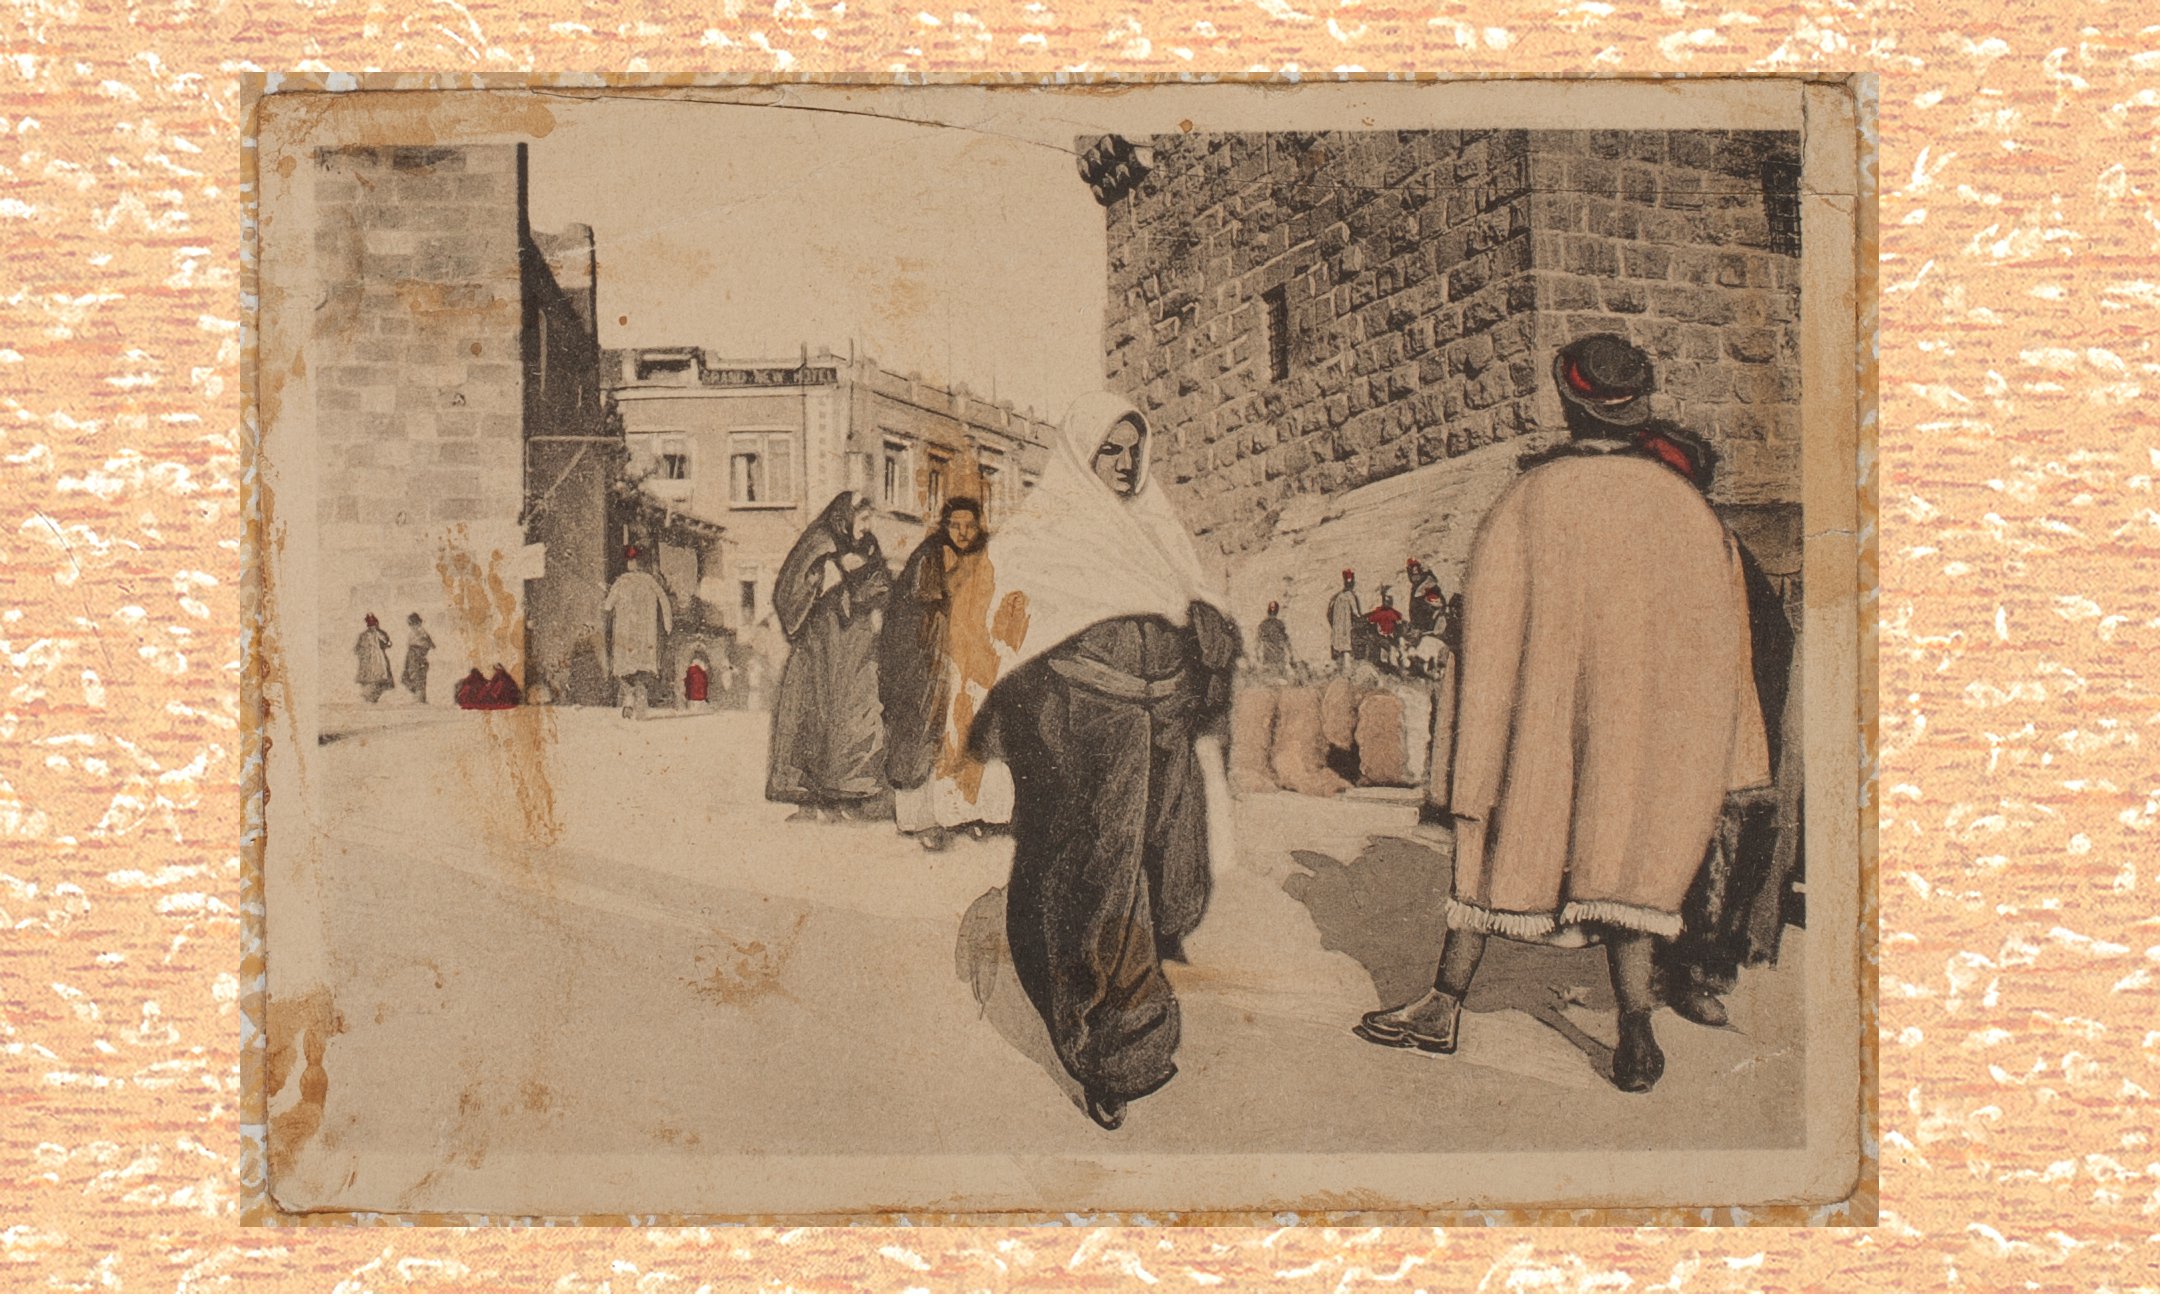 A card of the Tower of David in Jerusalem, from the early 20th century. Anne wrote in her diary that Margot wanted to emigrate to Palestine after the war to work as a maternity nurse.